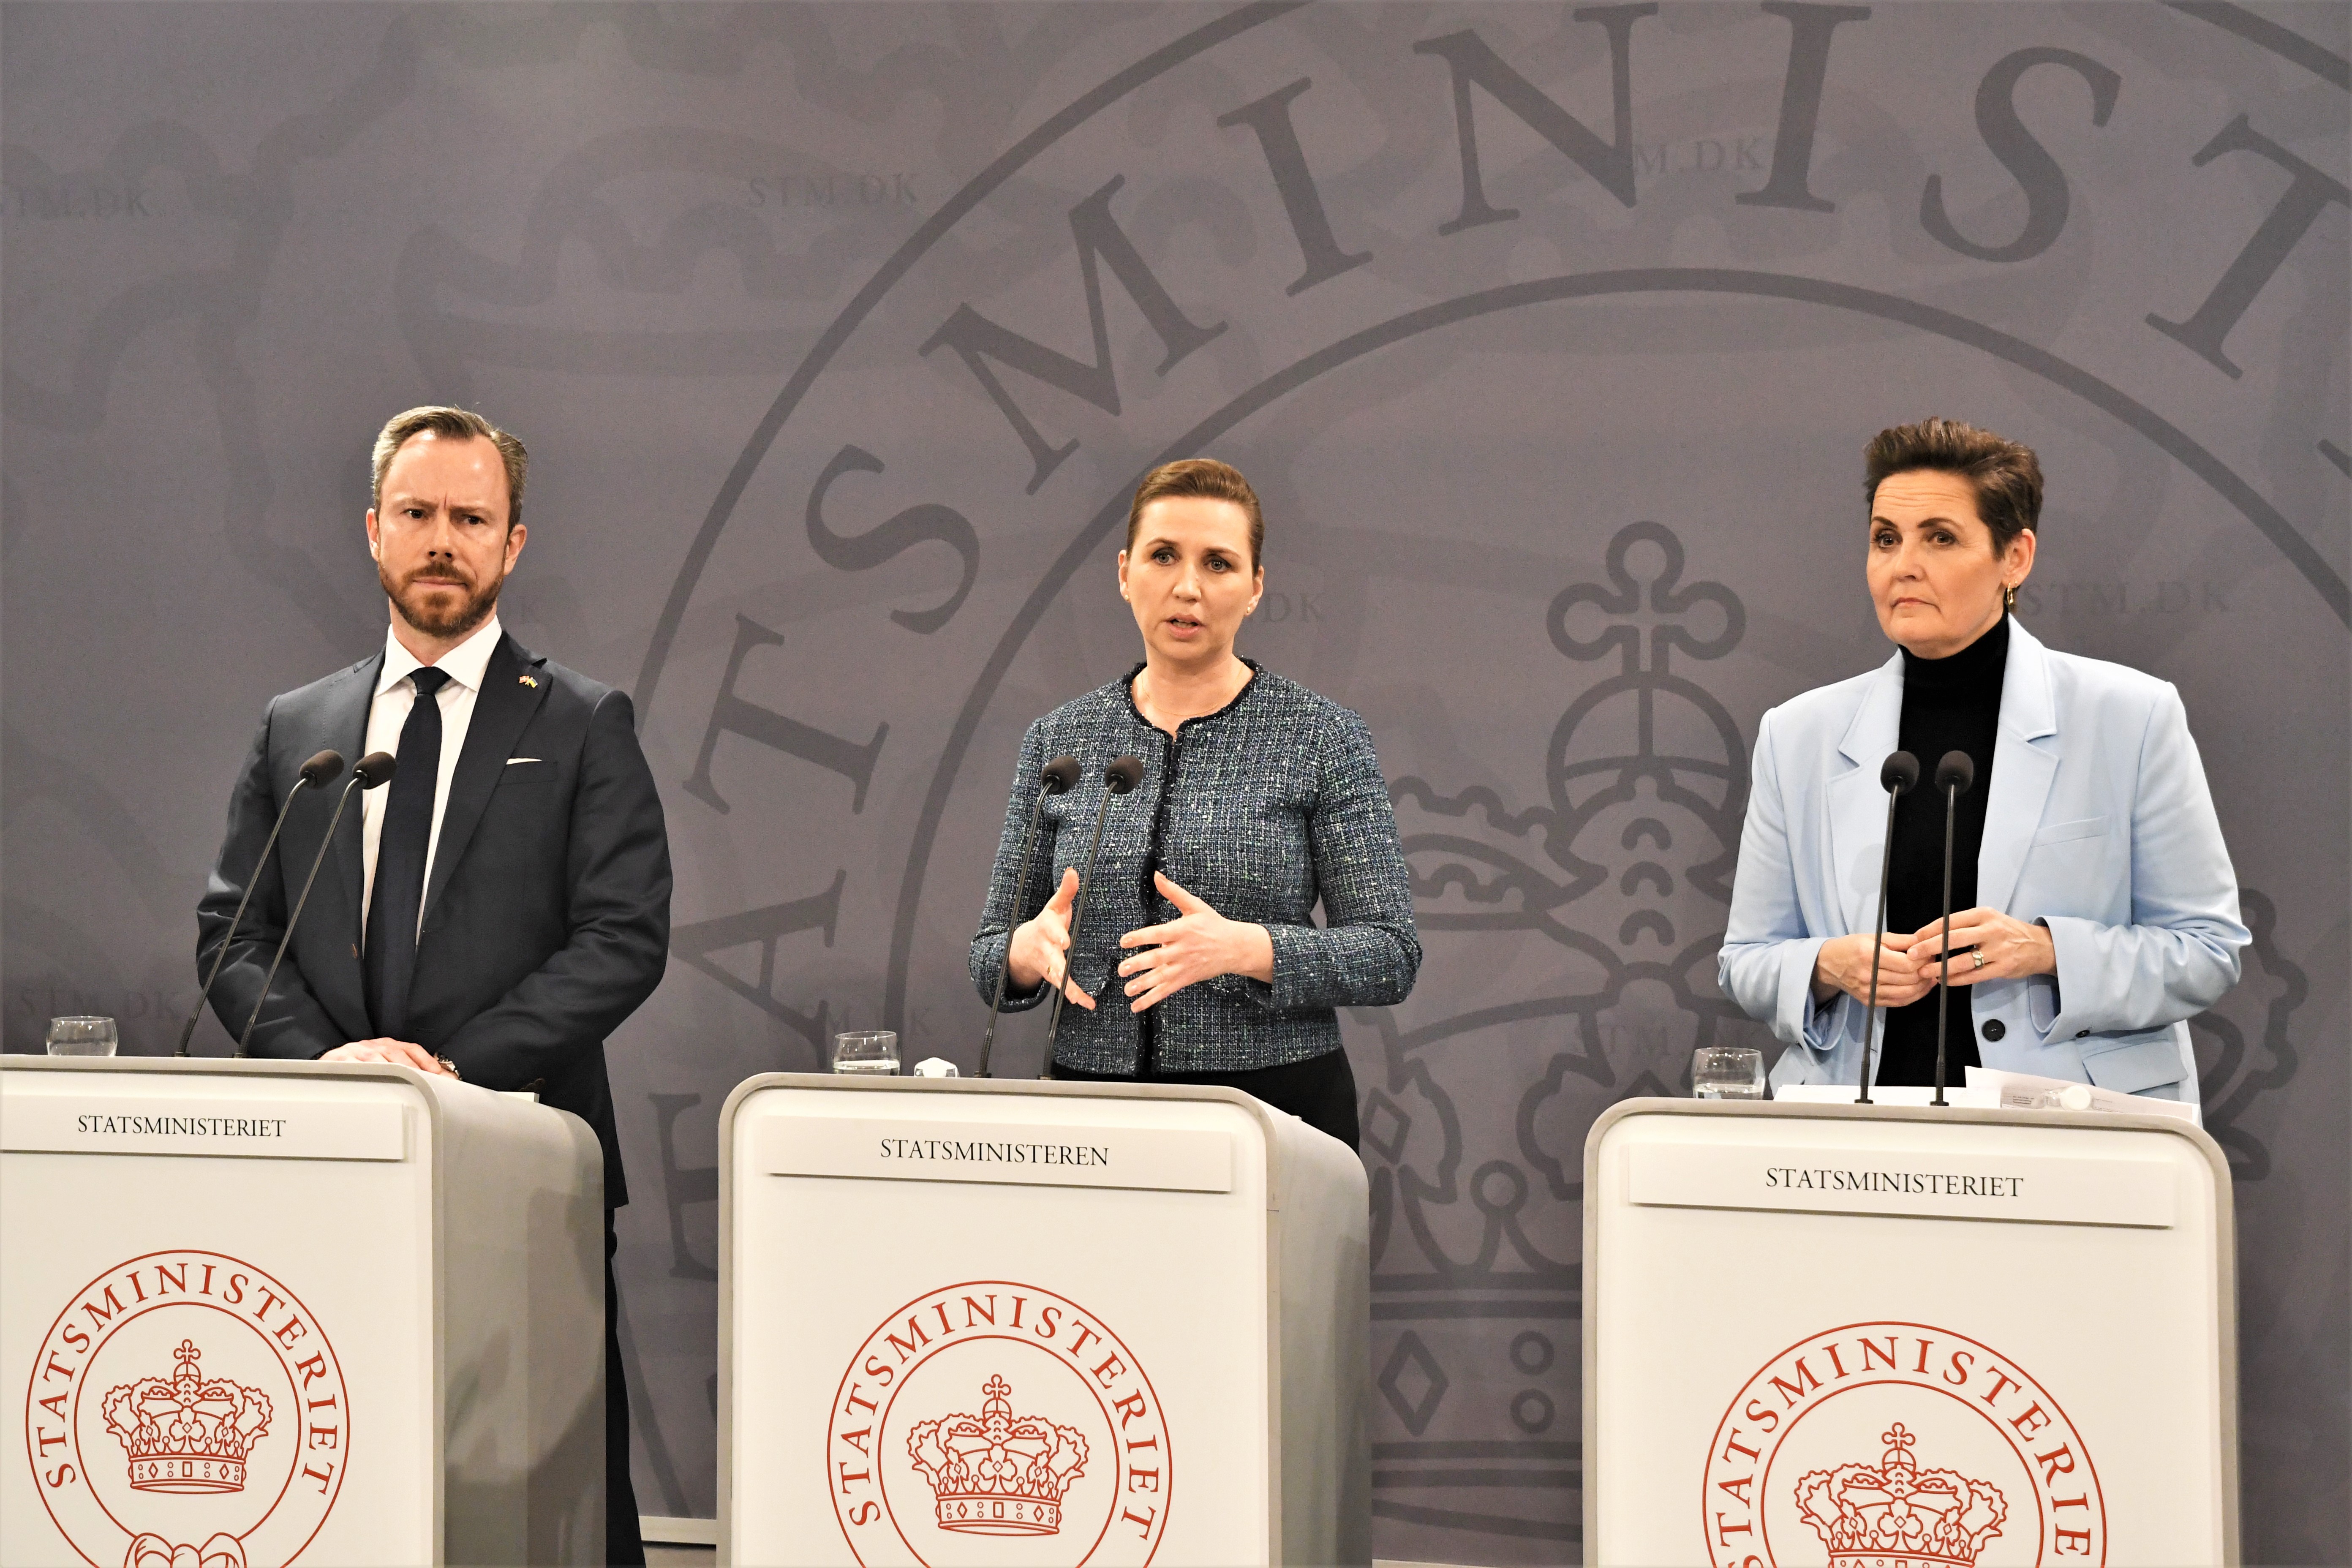 The Danes will vote in the referendum on 1 June on a ‘historic’ increase in military spending